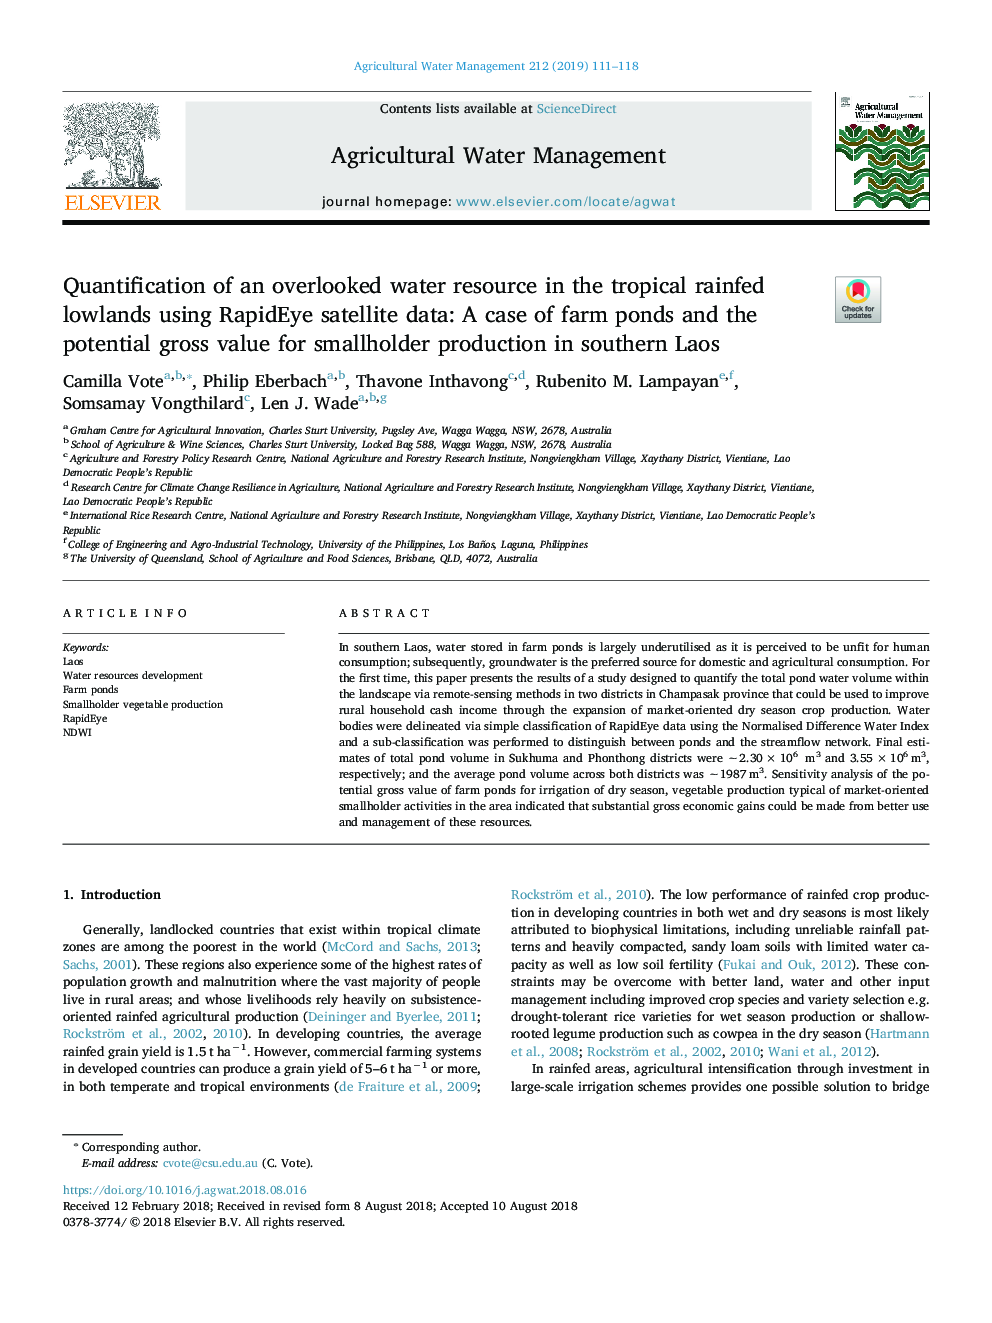 Quantification of an overlooked water resource in the tropical rainfed lowlands using RapidEye satellite data: A case of farm ponds and the potential gross value for smallholder production in southern Laos